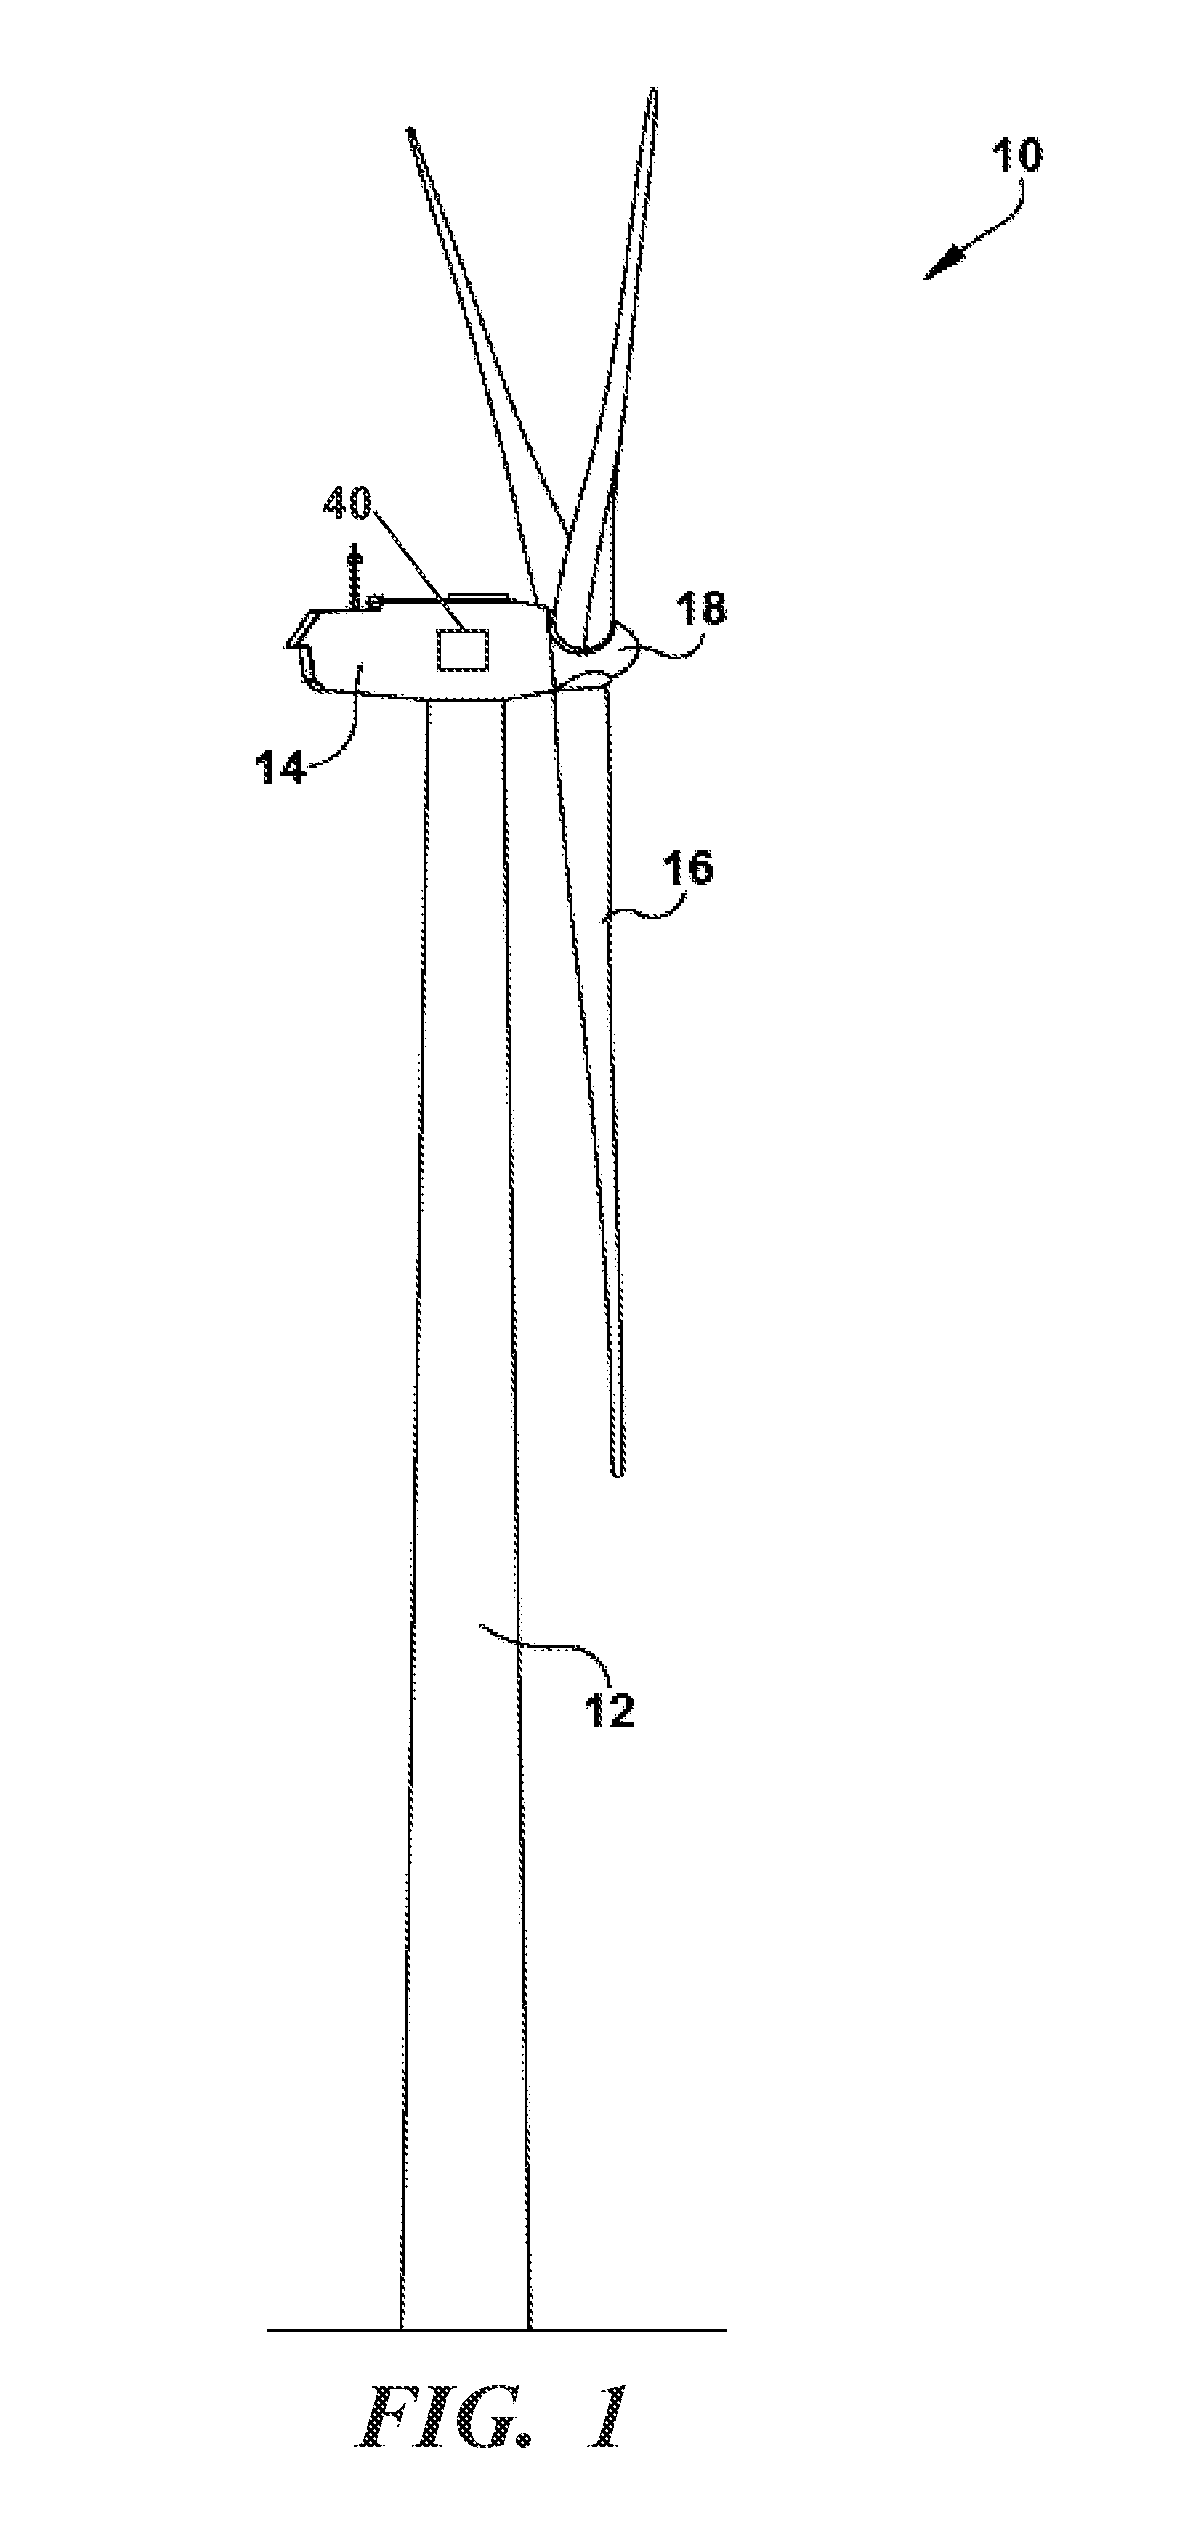 Airflow modifying element for suppressing airflow noise